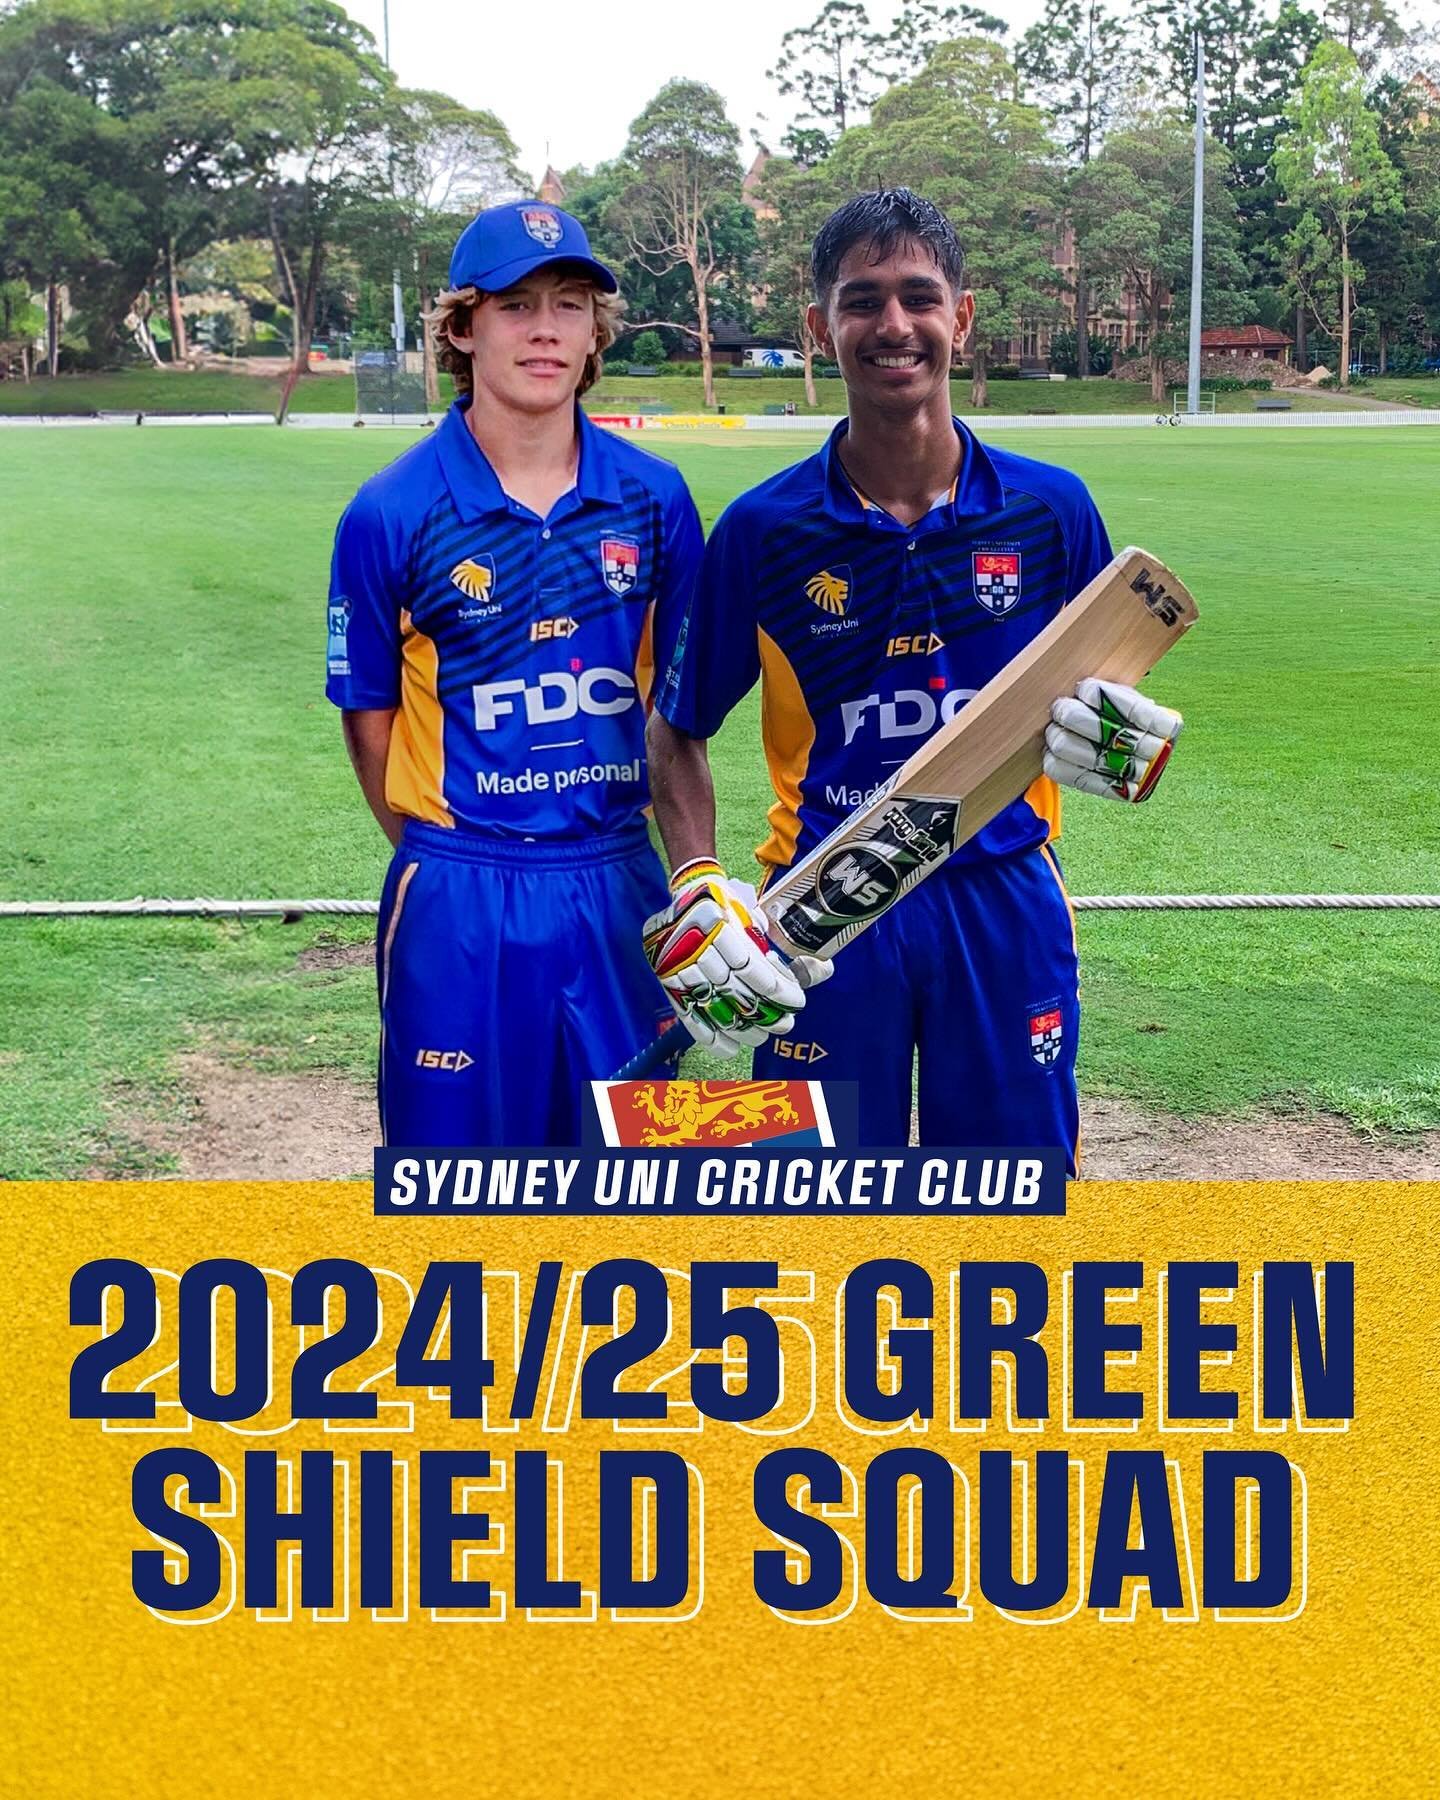 🔵 GREEN SHIELD SQUAD ANNOUNCEMENT 🟡

The Sydney University Cricket Club is delighted to announce their Green Shield Squad for the 2024/25 Season.

We welcome back our returning players and extend a special welcome to our new recruits. The Club, Sup